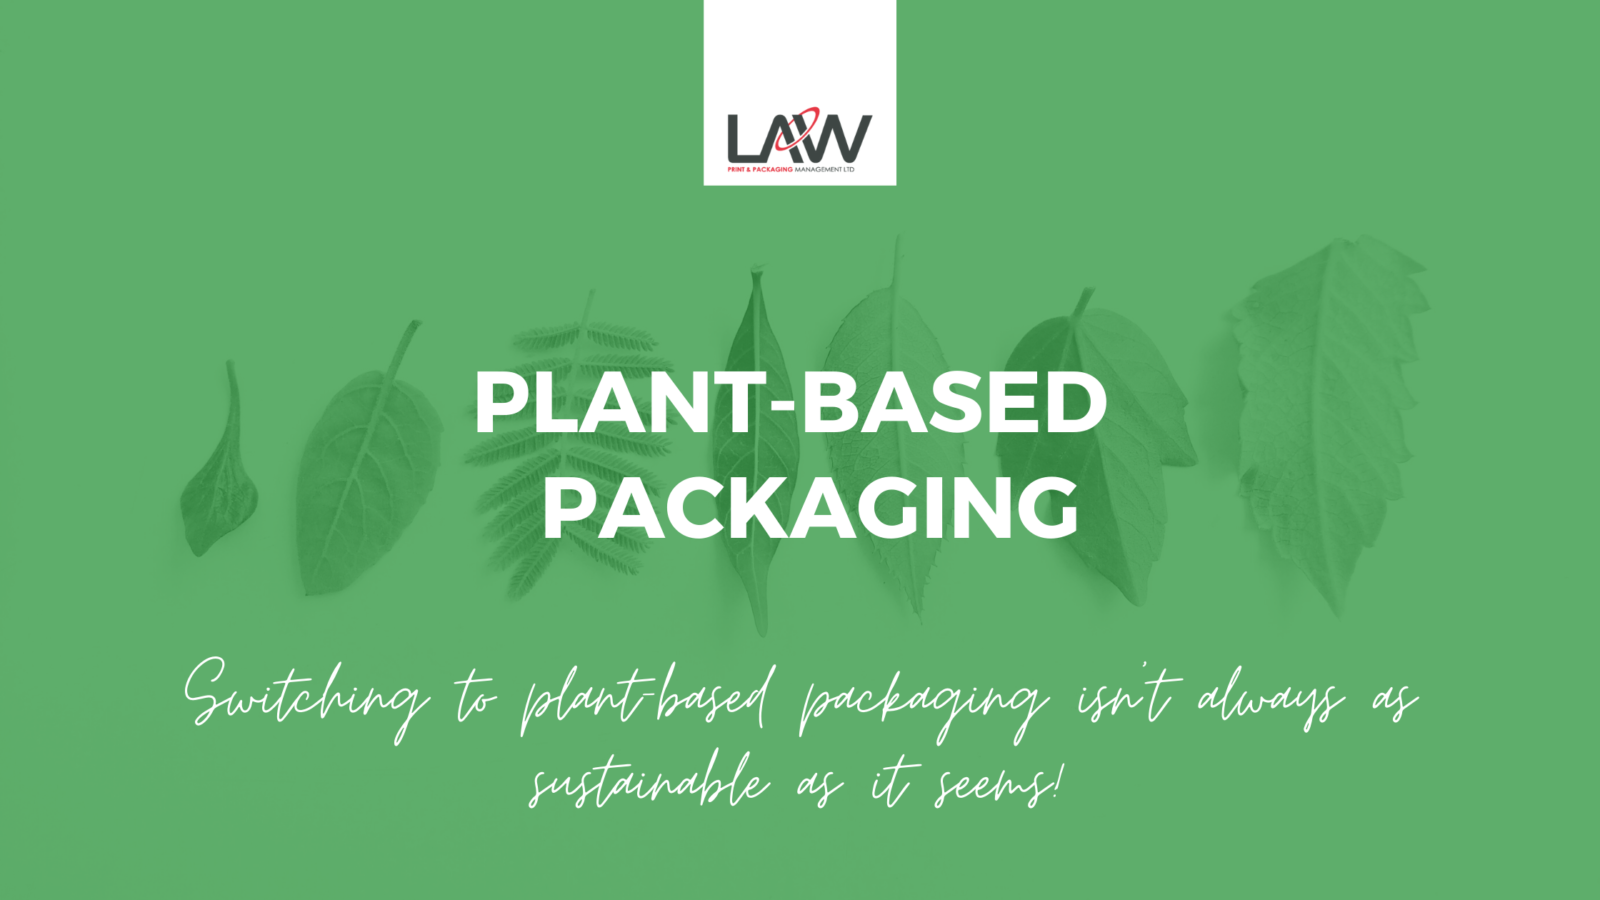 Is Plant-Based Sustainable? Law Print